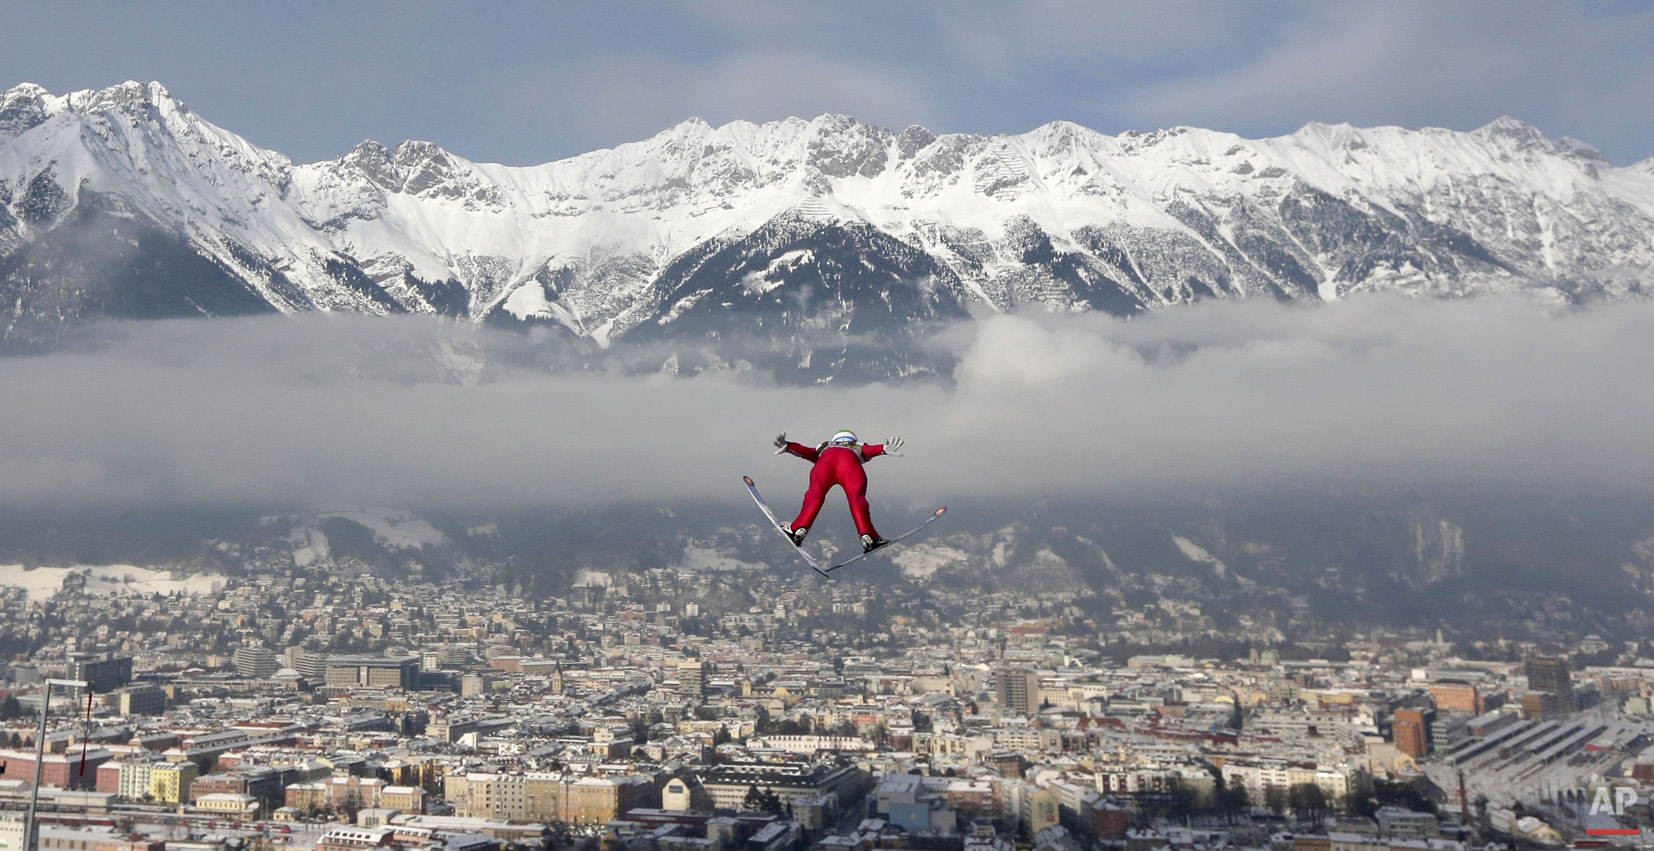  Norway's Anders Jacobsen soars during the trial jump at the third stage of the four hills ski jumping tournament in Innsbruck, Austria, Saturday, Jan. 3, 2015. (AP Photo/Matthias Schrader) 